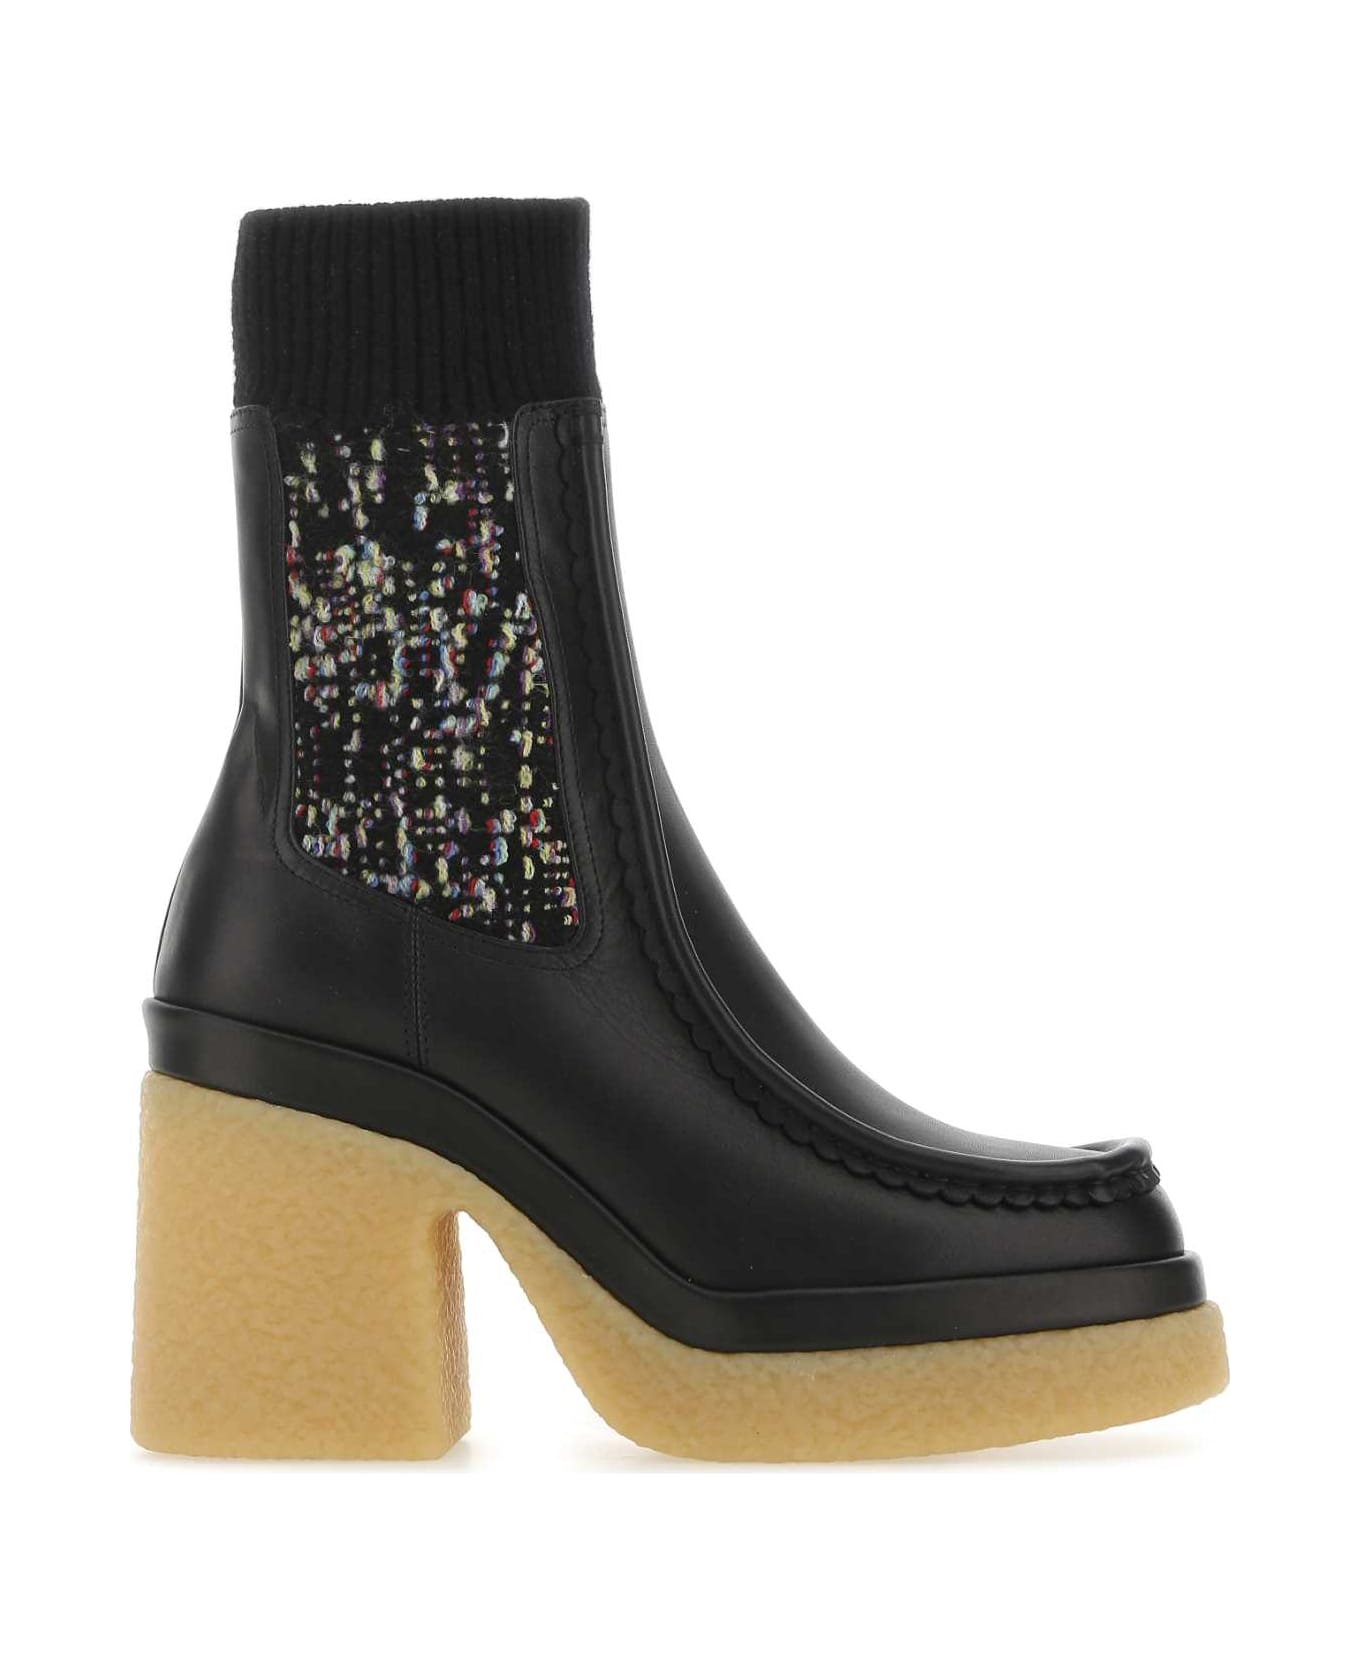 Chloé Black Leather Jamie Ankle Boots - 001 ブーツ